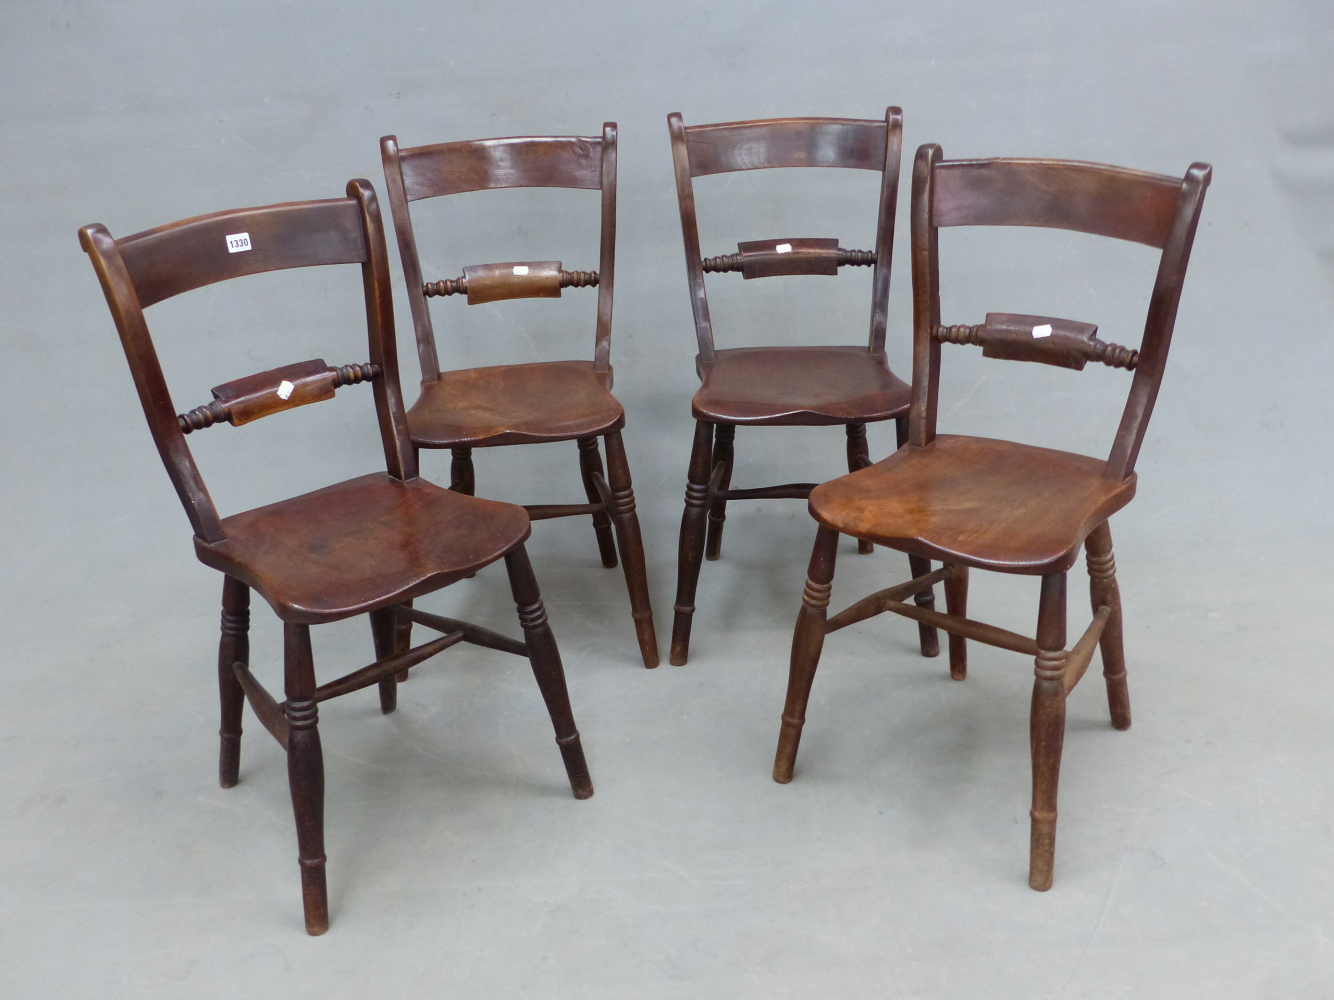 A SET OF FOUR ANTIQUE OXFORD CHAIRS WITH SADDLE SEATS AND RING TURNED BALUSTER LEGS